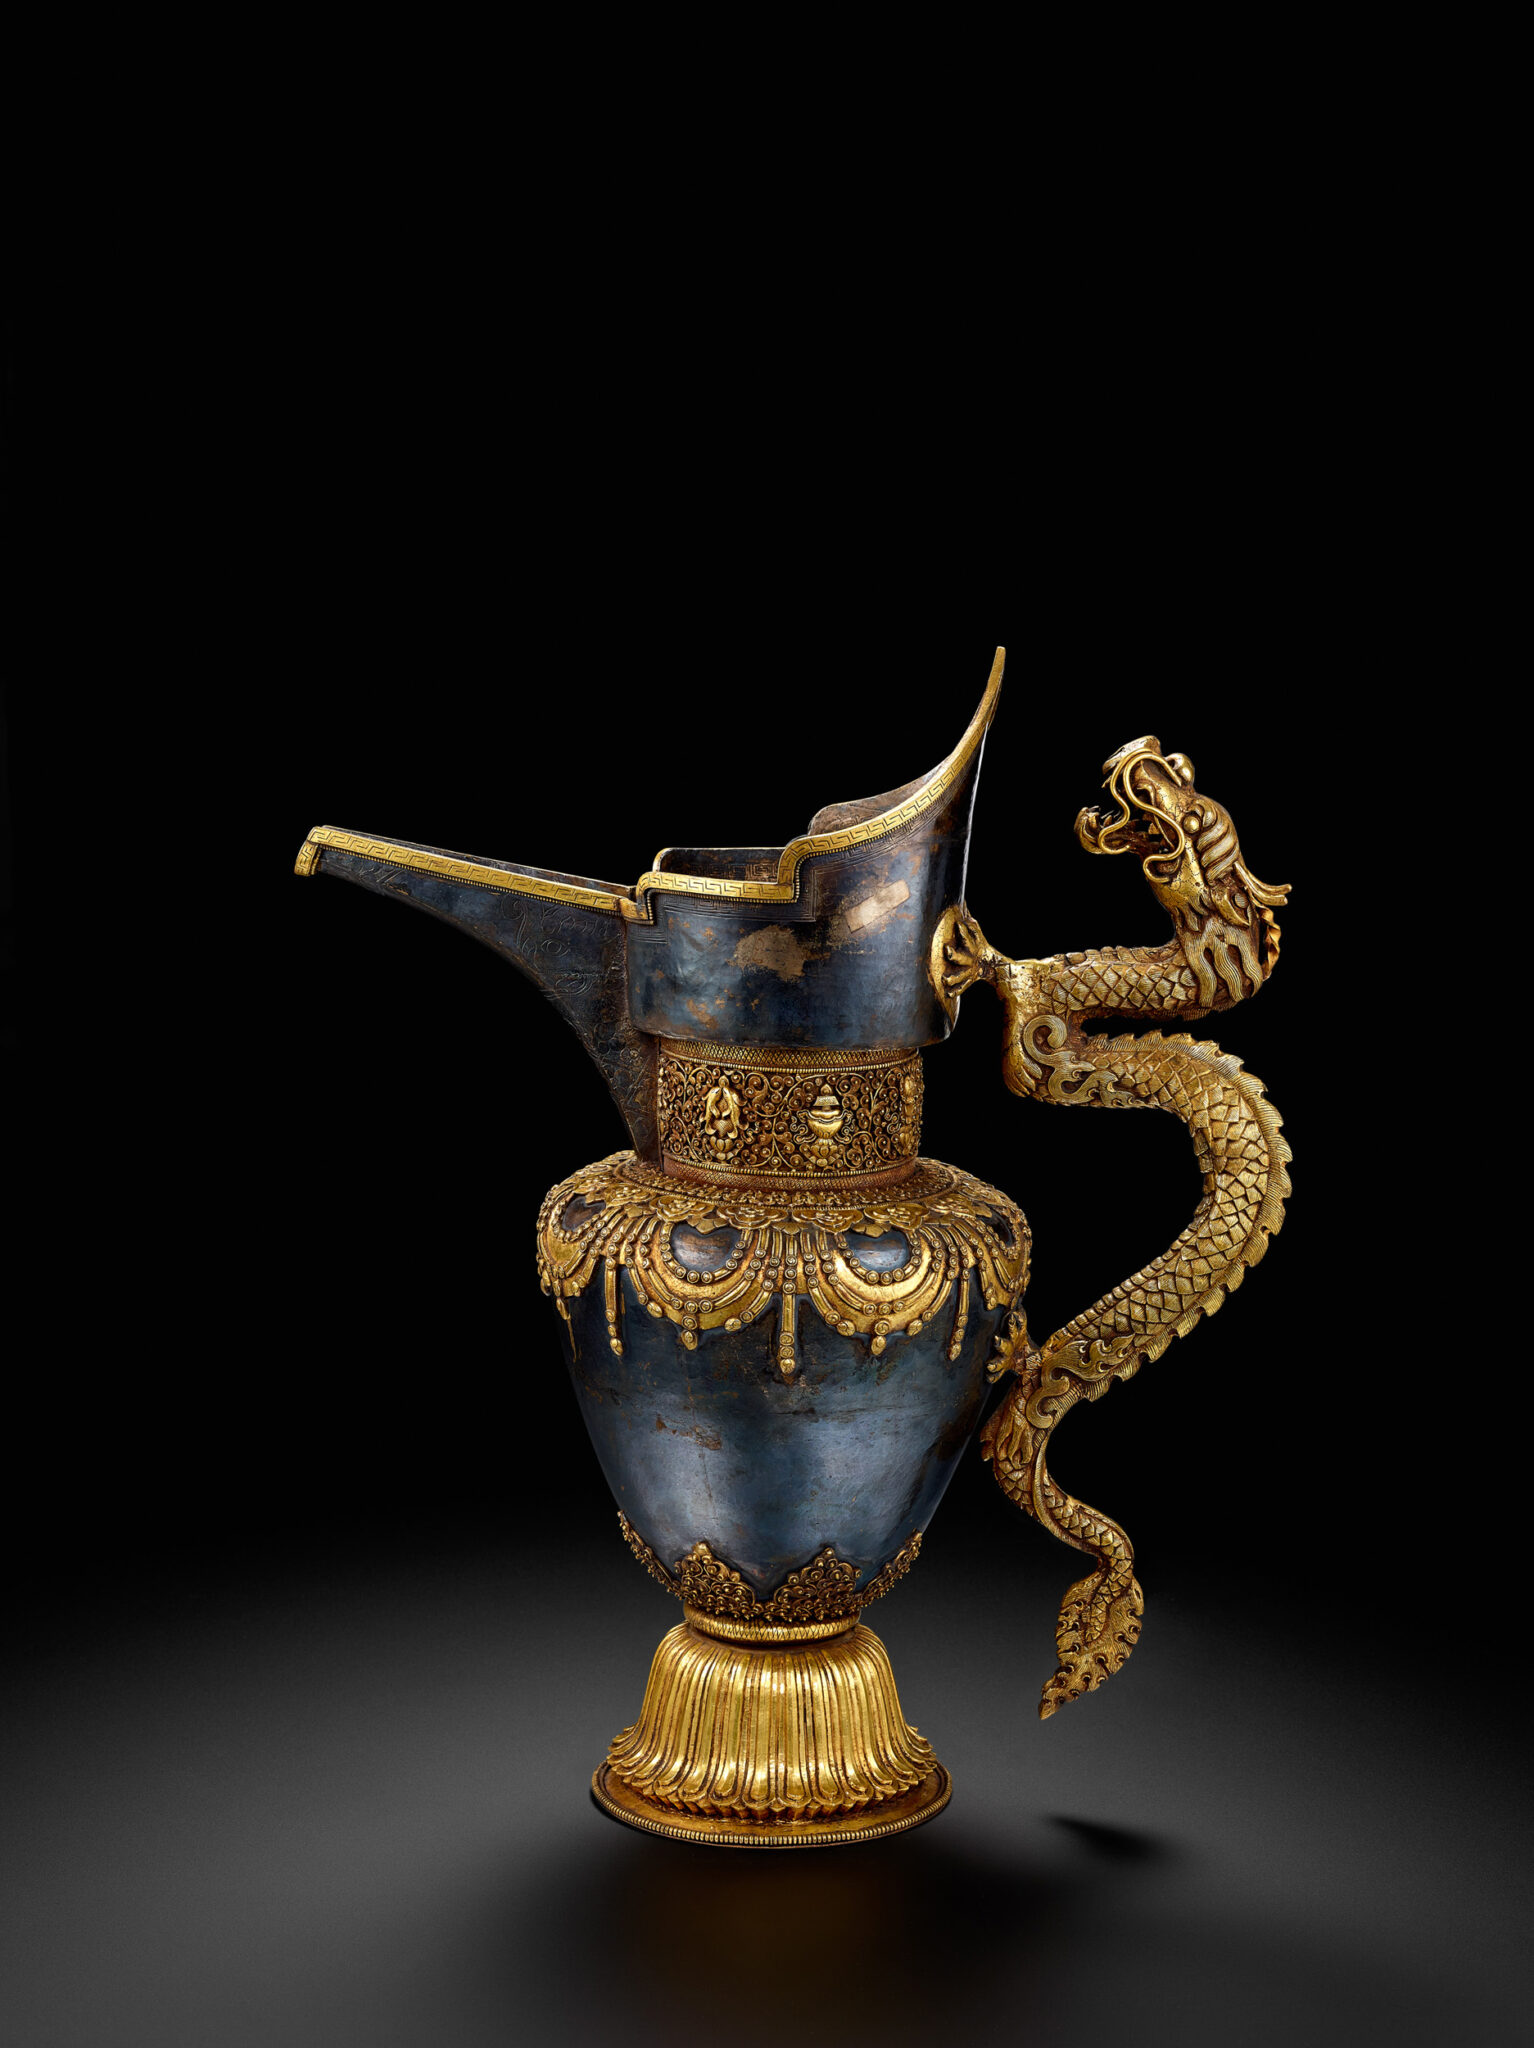 Silver pitcher with crown-shaped rim and golden decoration at base and neck; features dragon handle